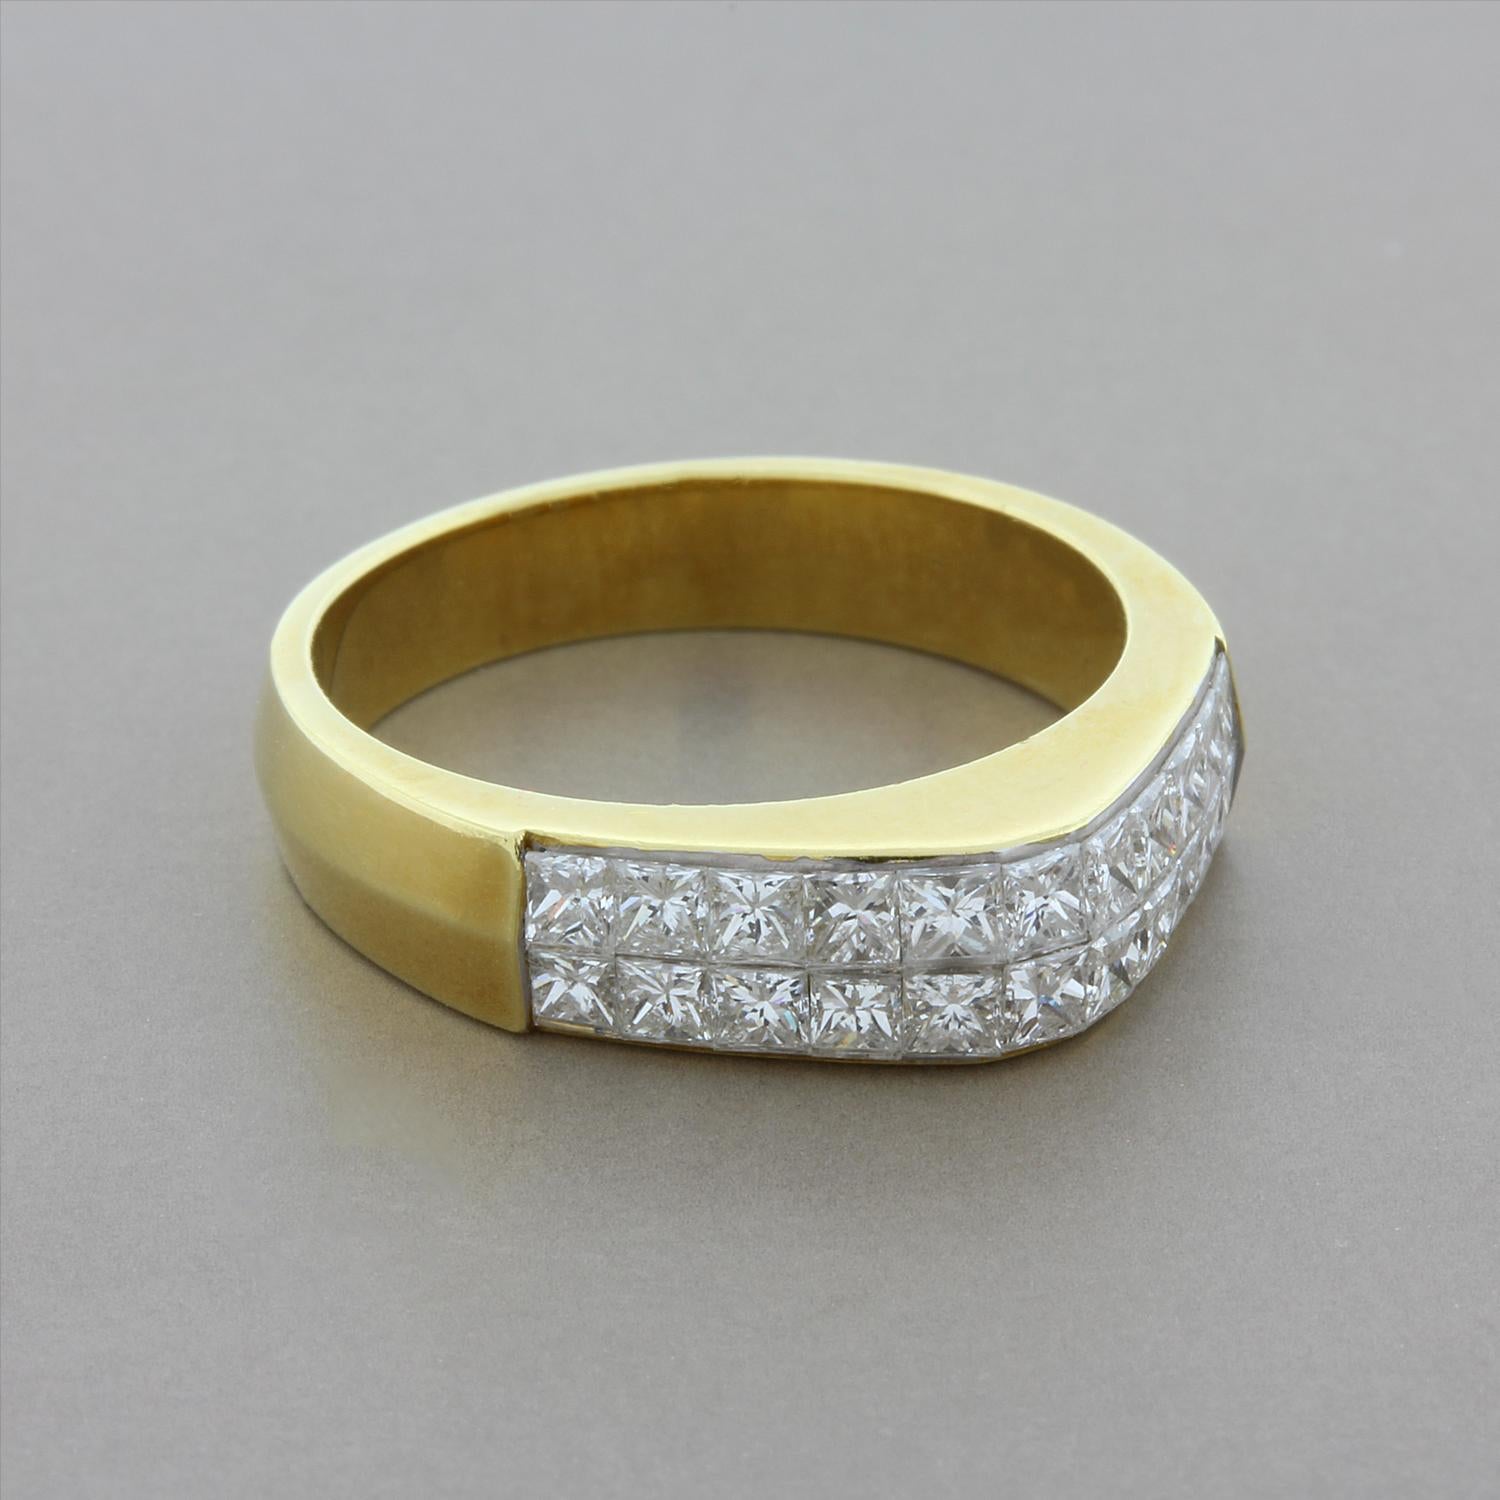 This elegant ring features two rows of princess cut diamonds invisible set in an 18K yellow gold setting. The domed triangular center makes this ring stand out from the rest.

Ring size 6.25
